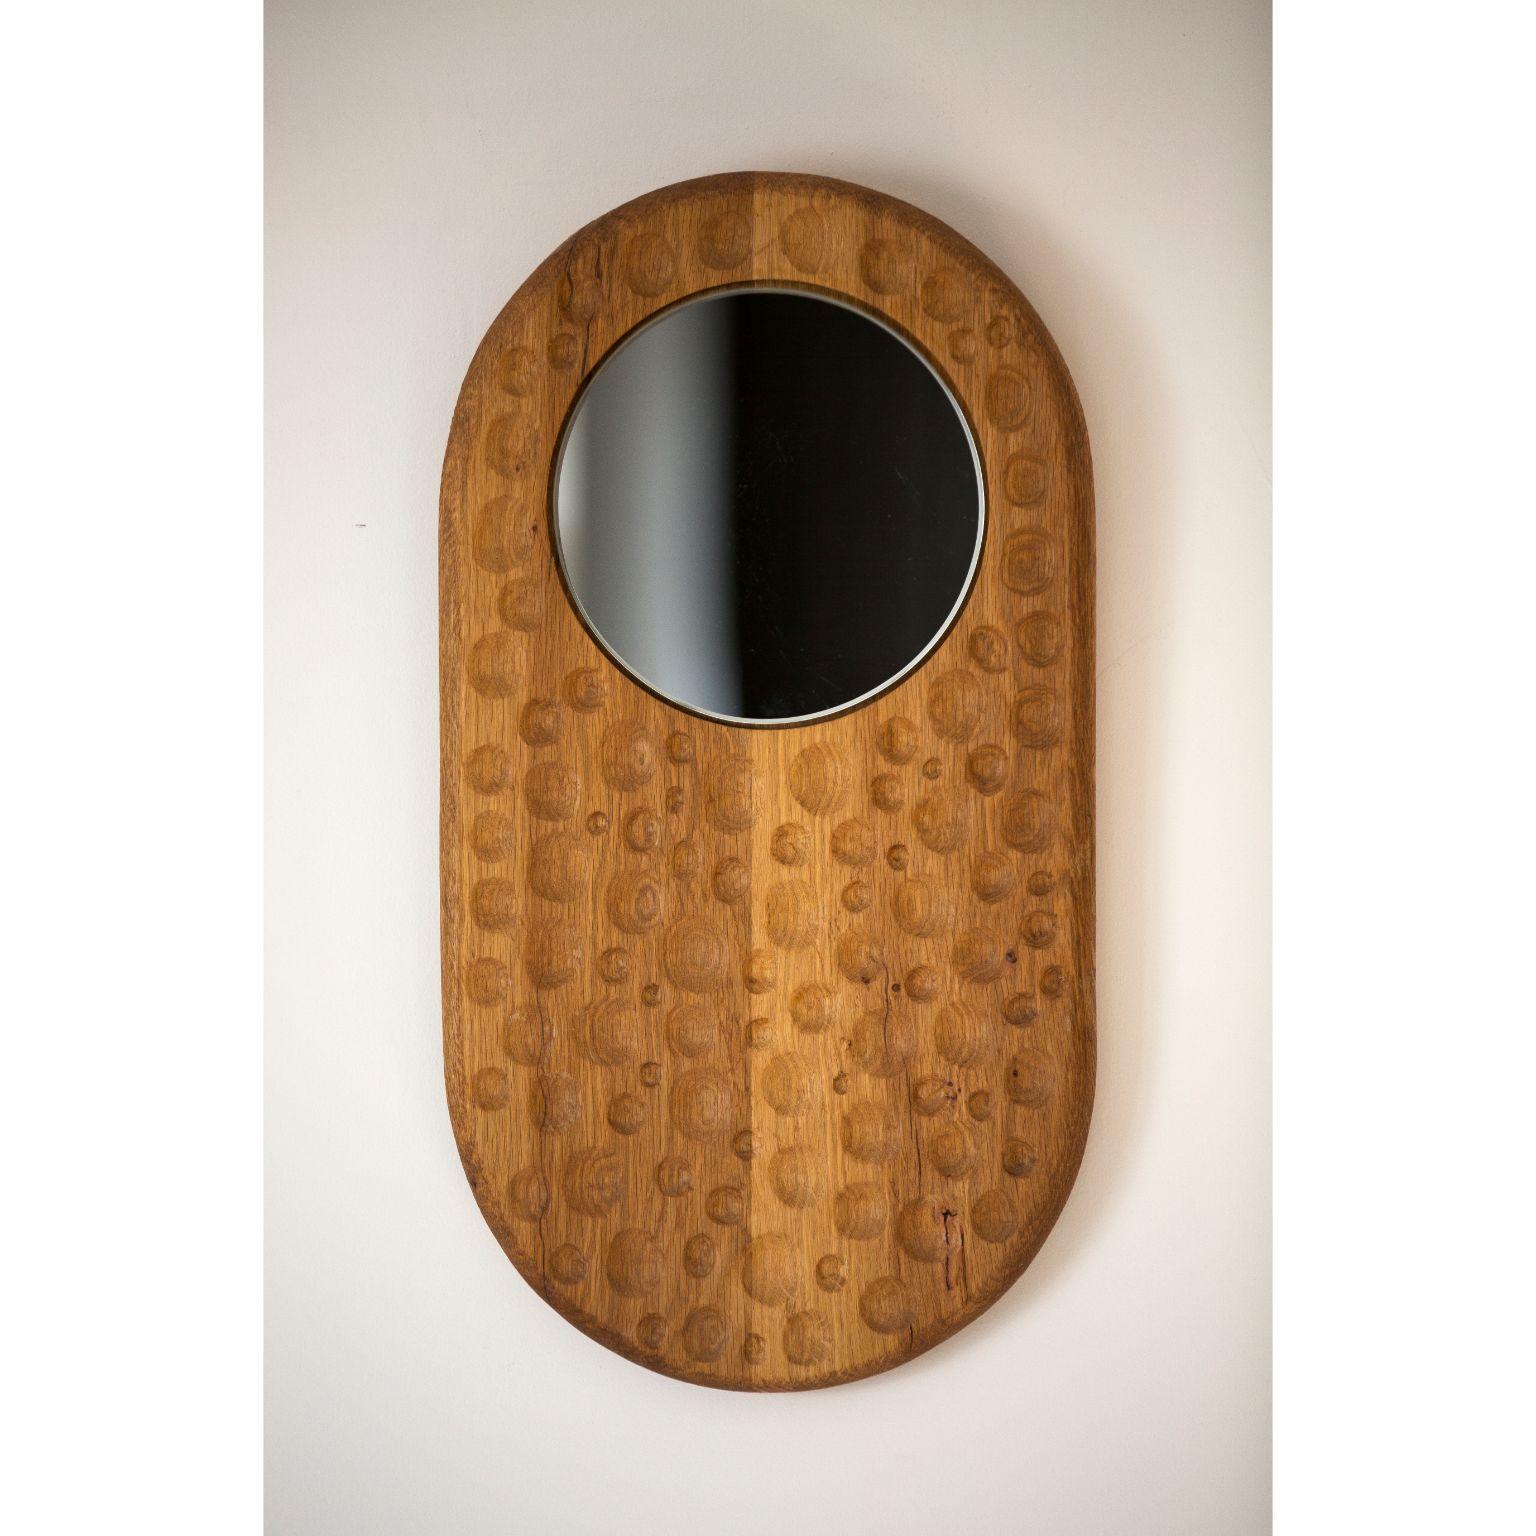 Bumerang mirror by Rectangle Studio
Dimensions: w 26 x D 2 x H 50 cm 
Materials: Massive oak, natural wood oil, natural mirror

'Boomerang' mirror is handmade by the designer.
Each product has special differences, which are unlike the other